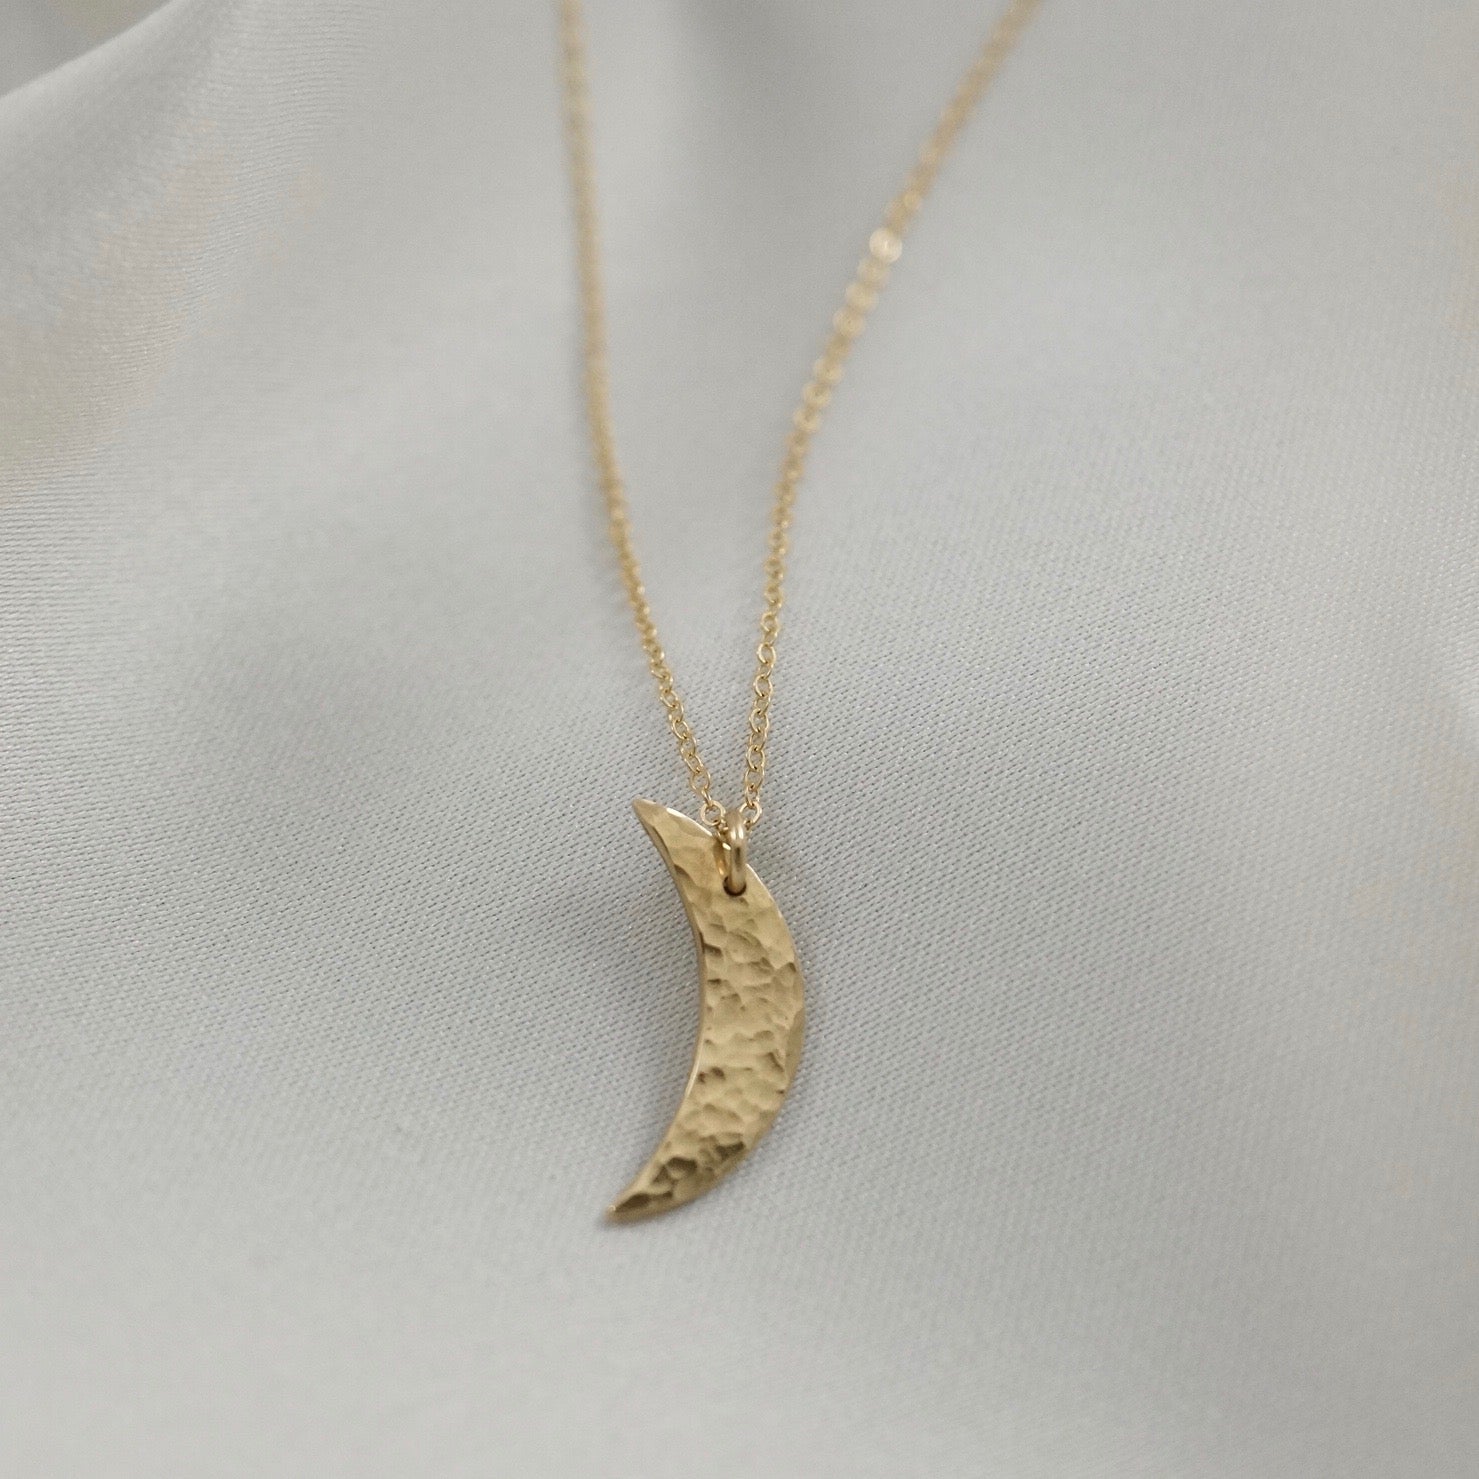 Crescent Moon Necklace / Large Solid Jeweler's Brass Moon Pendant / 14k Gold  Filled Chain / Hand Forged